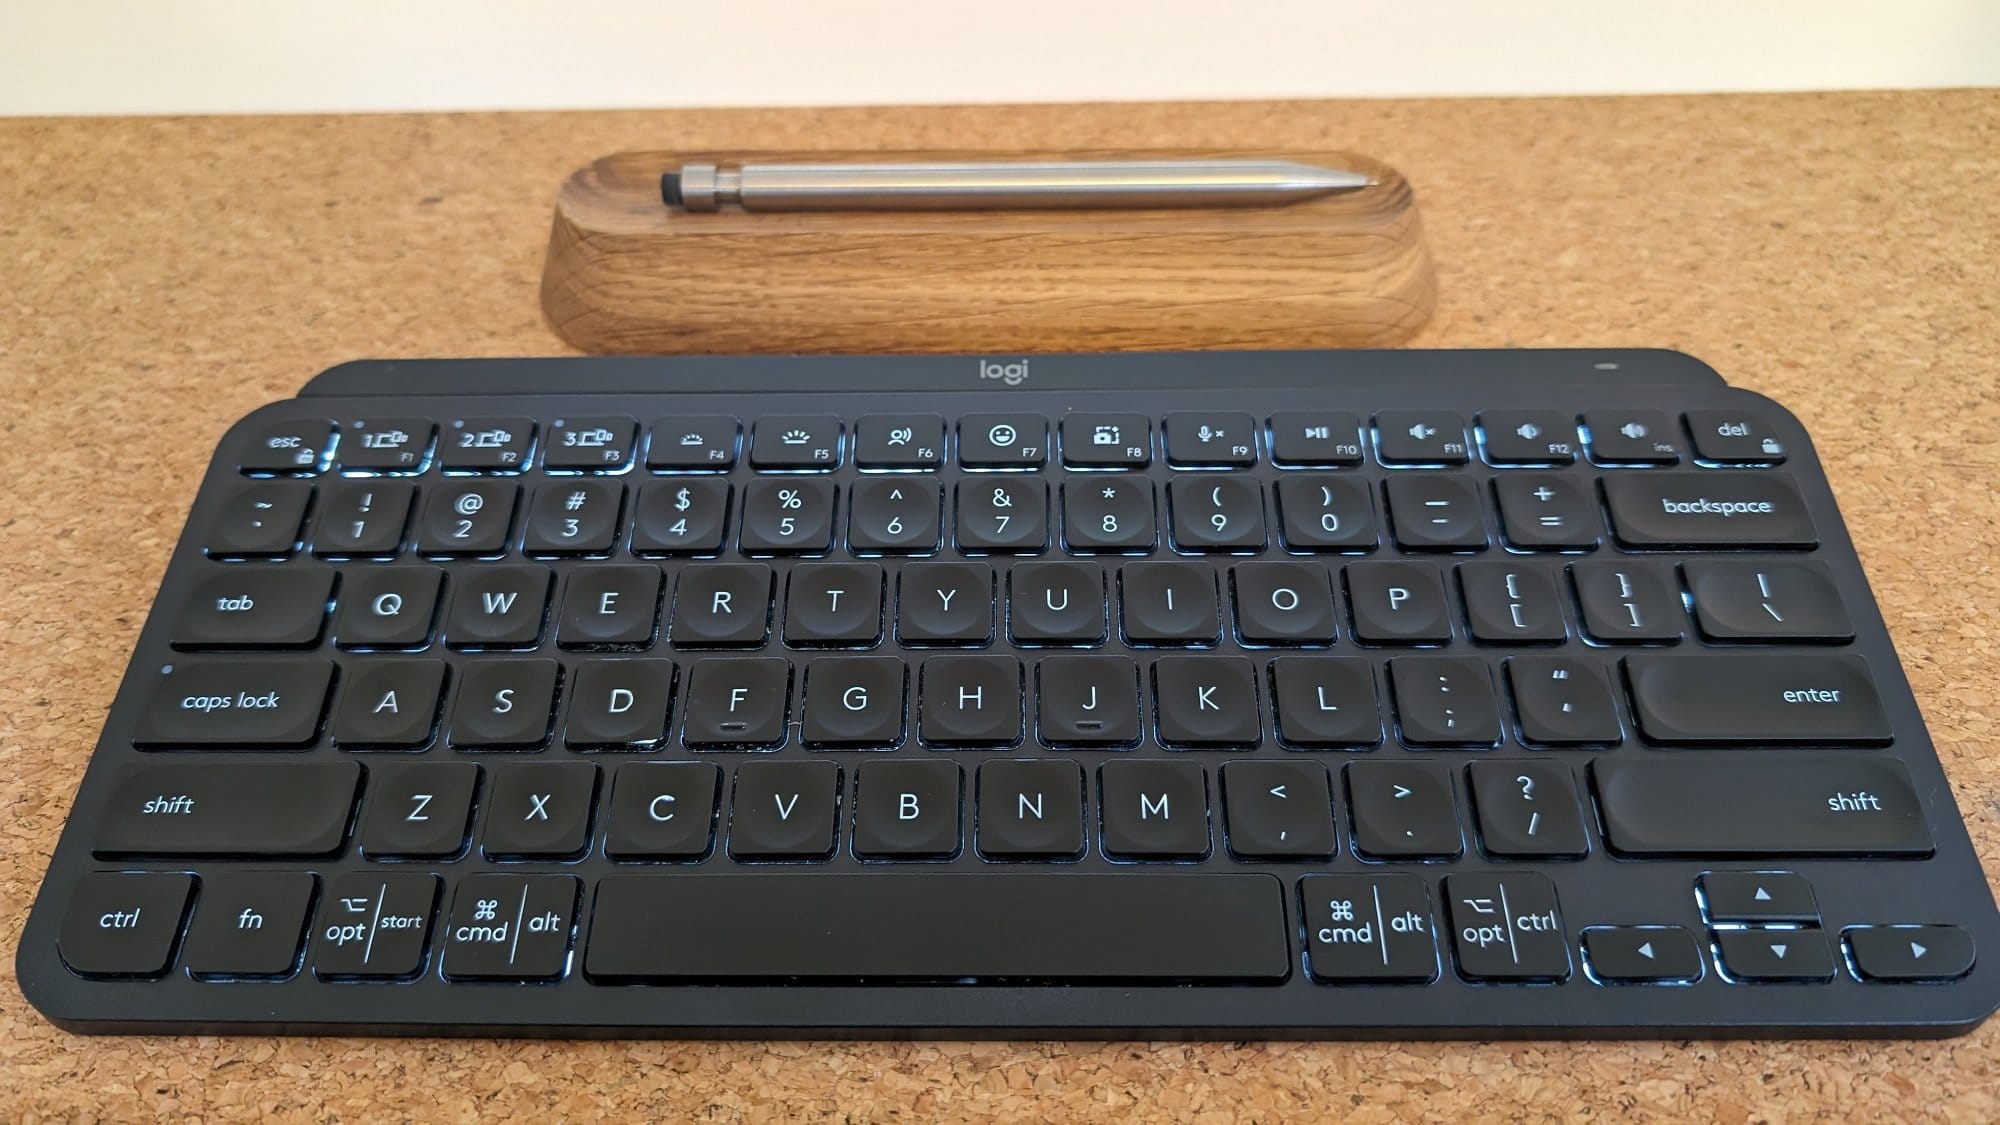  A close-up image of a black Logitech keyboard with illuminated keys, placed on a cork surface with a wooden pen holder behind it